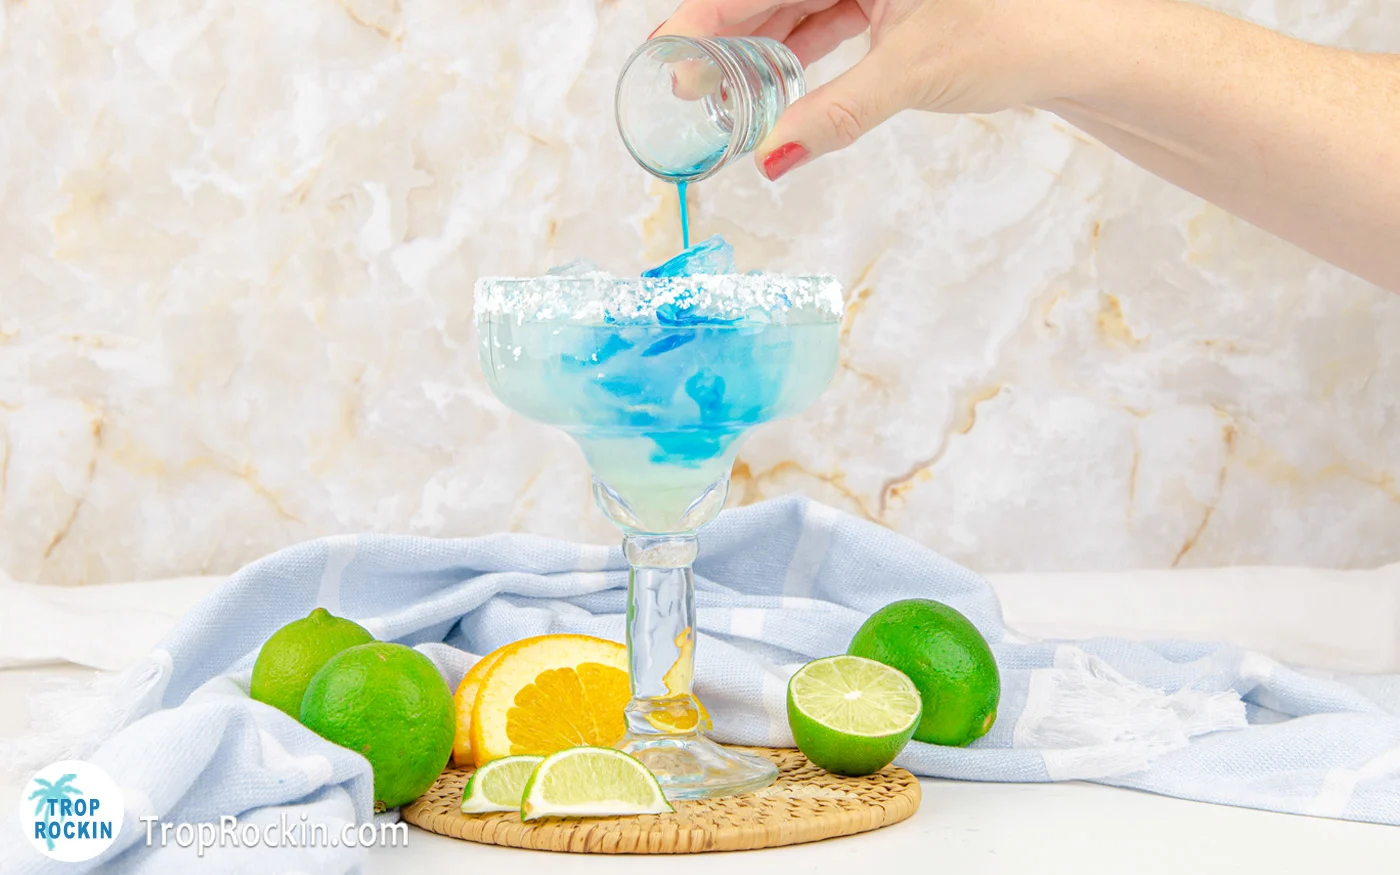 Pouring blue curacao into margarita glass filled with ice, lime juice and tequila.